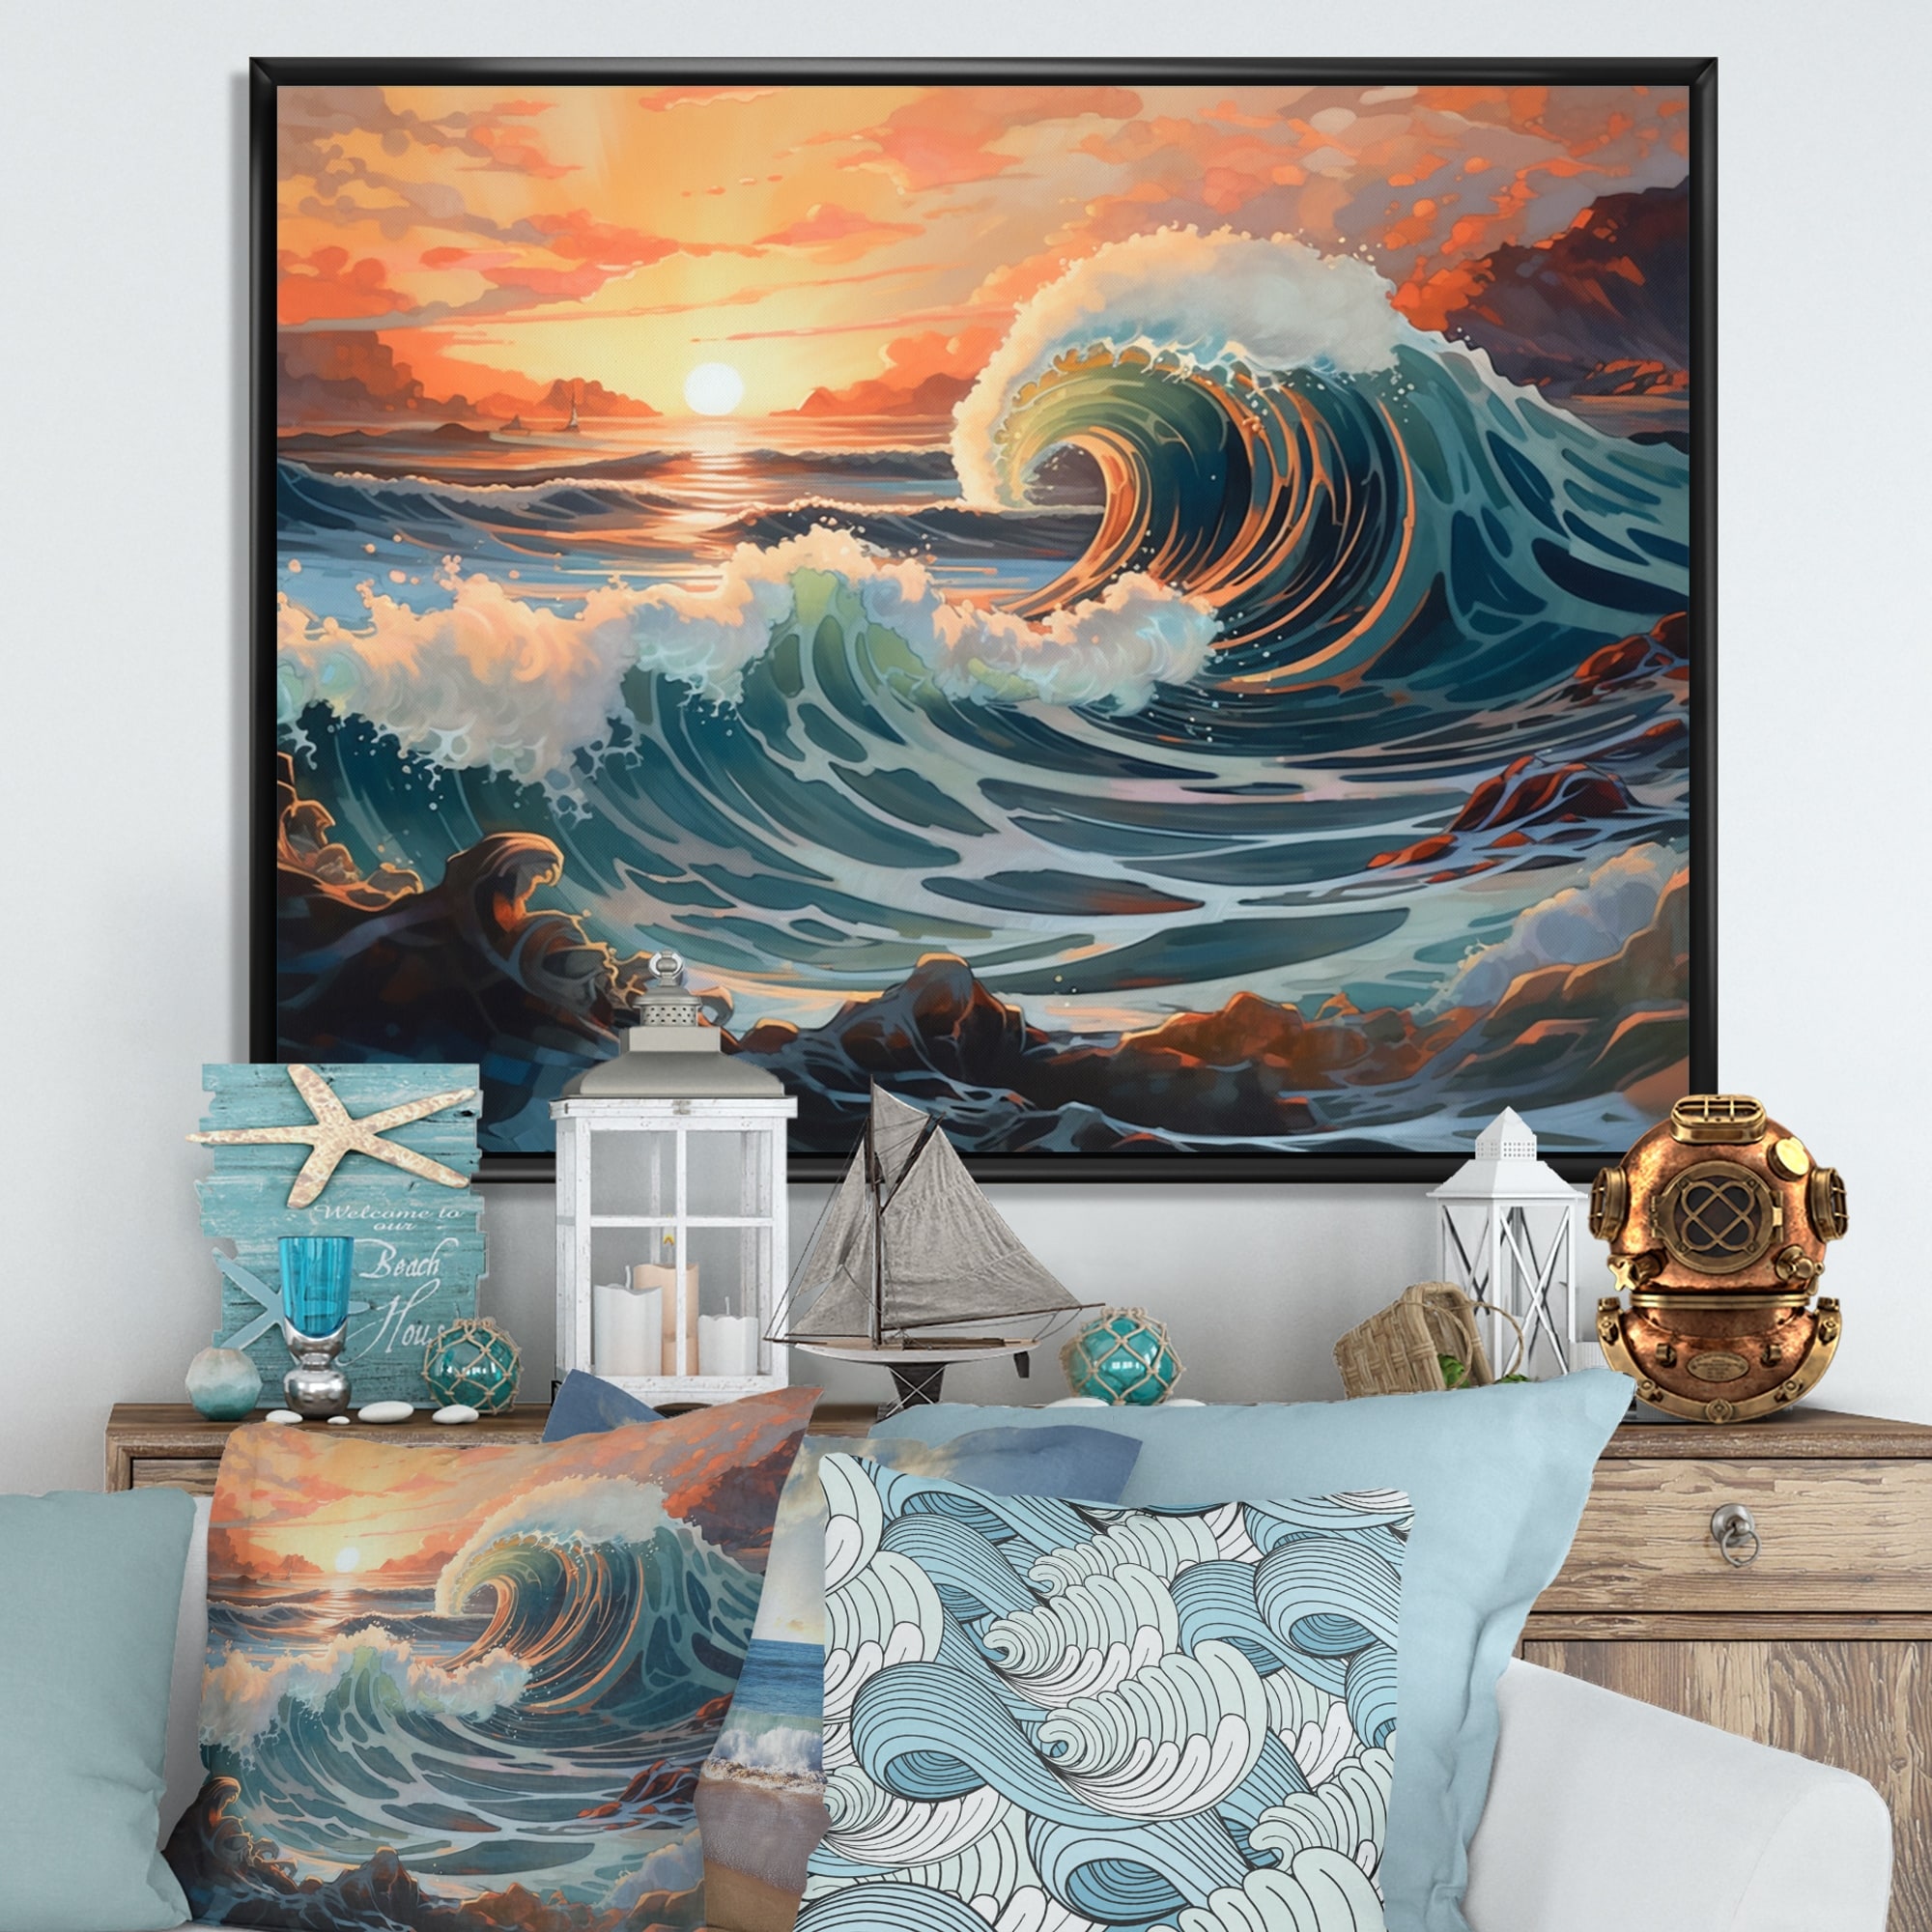 Picture Perfect International Small Waves by The Shore Giclee Print Canvas Wall Art, 24 Inches x 36 Inches x 1.5 Inches